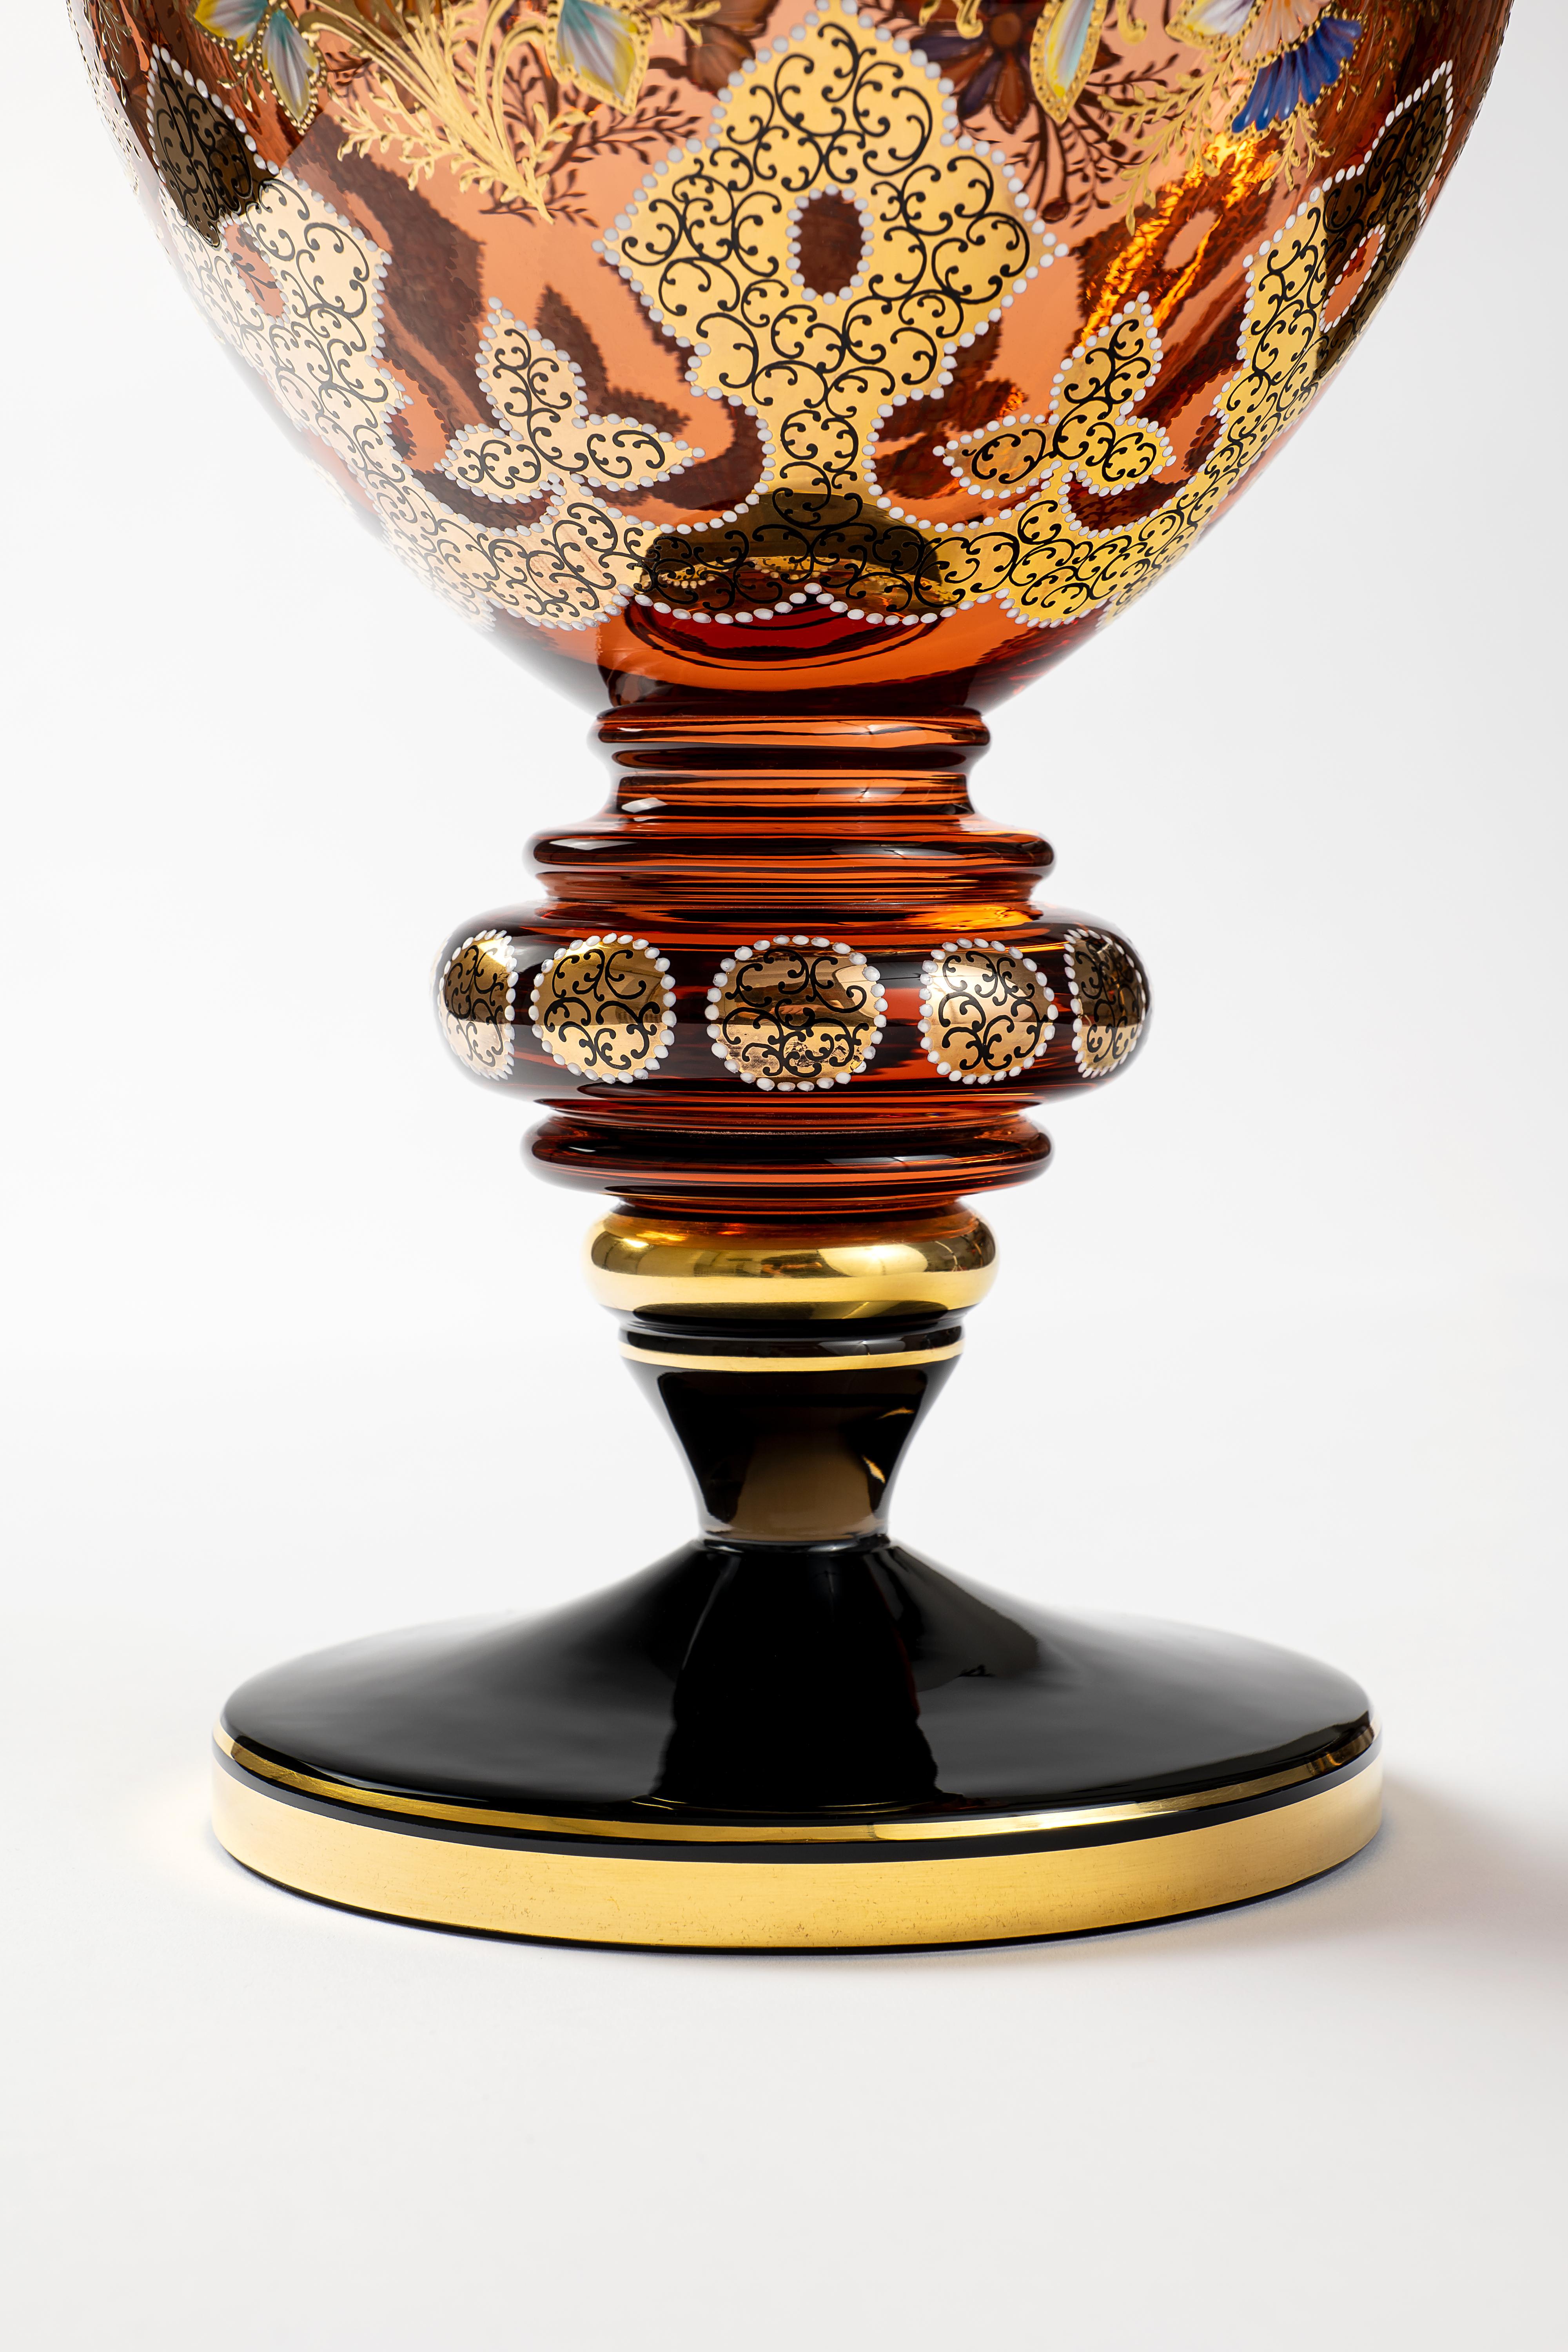 Czech Moser Unique Hand Painted Decorated with 24-Karat Gold Vase For Sale